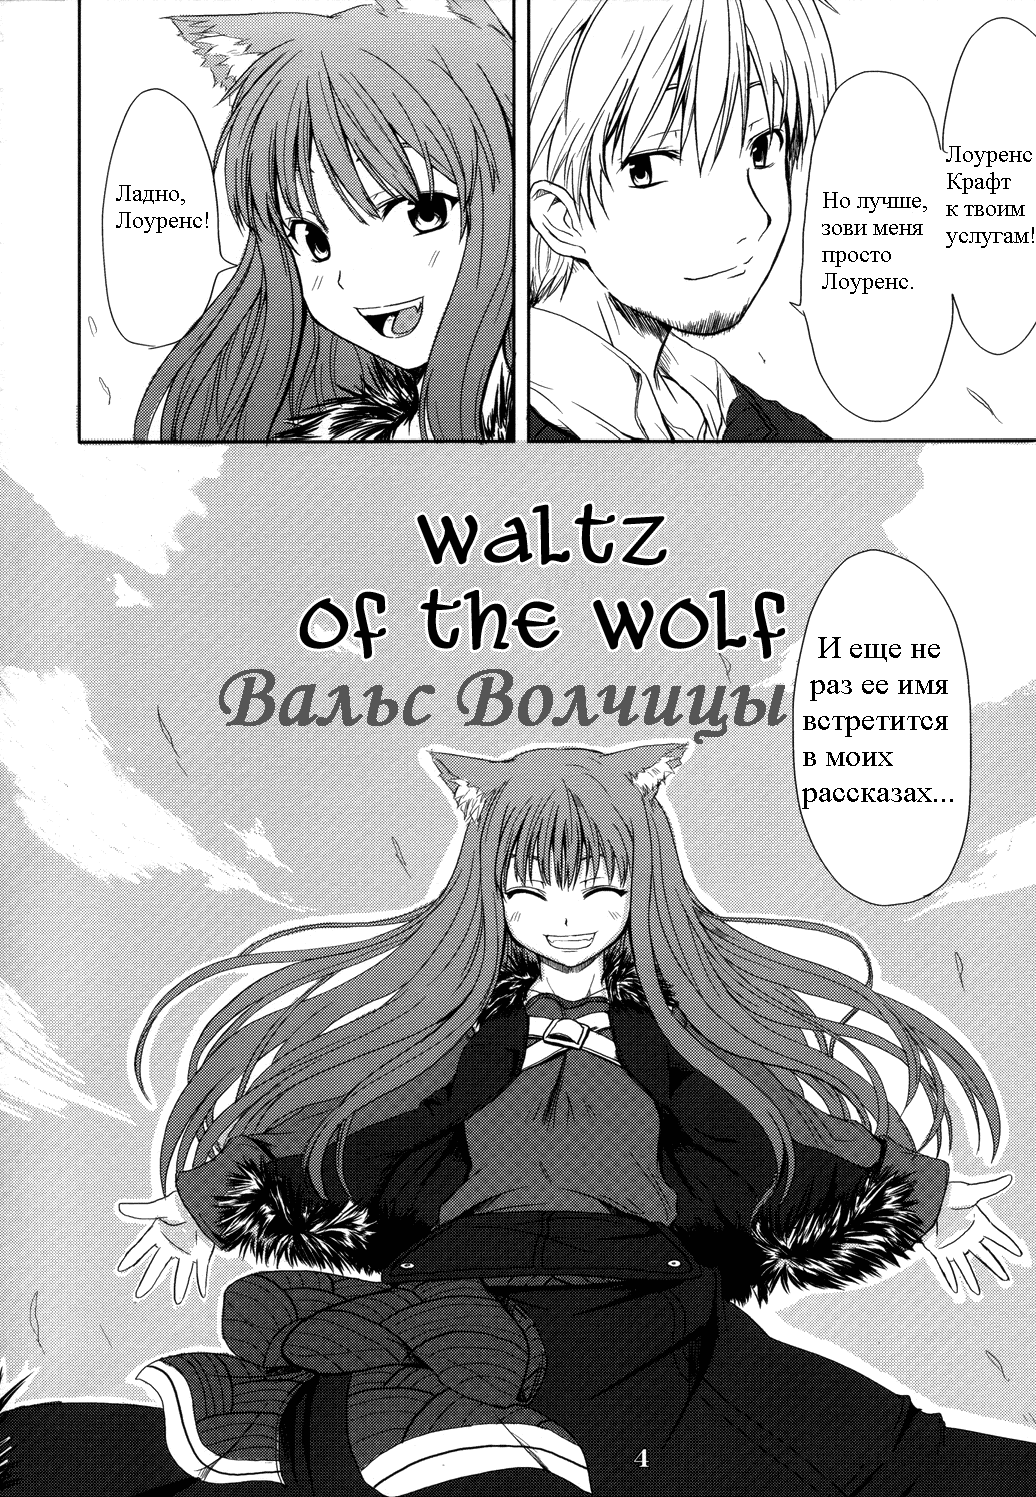 Waltz_of_the_Wolf_004